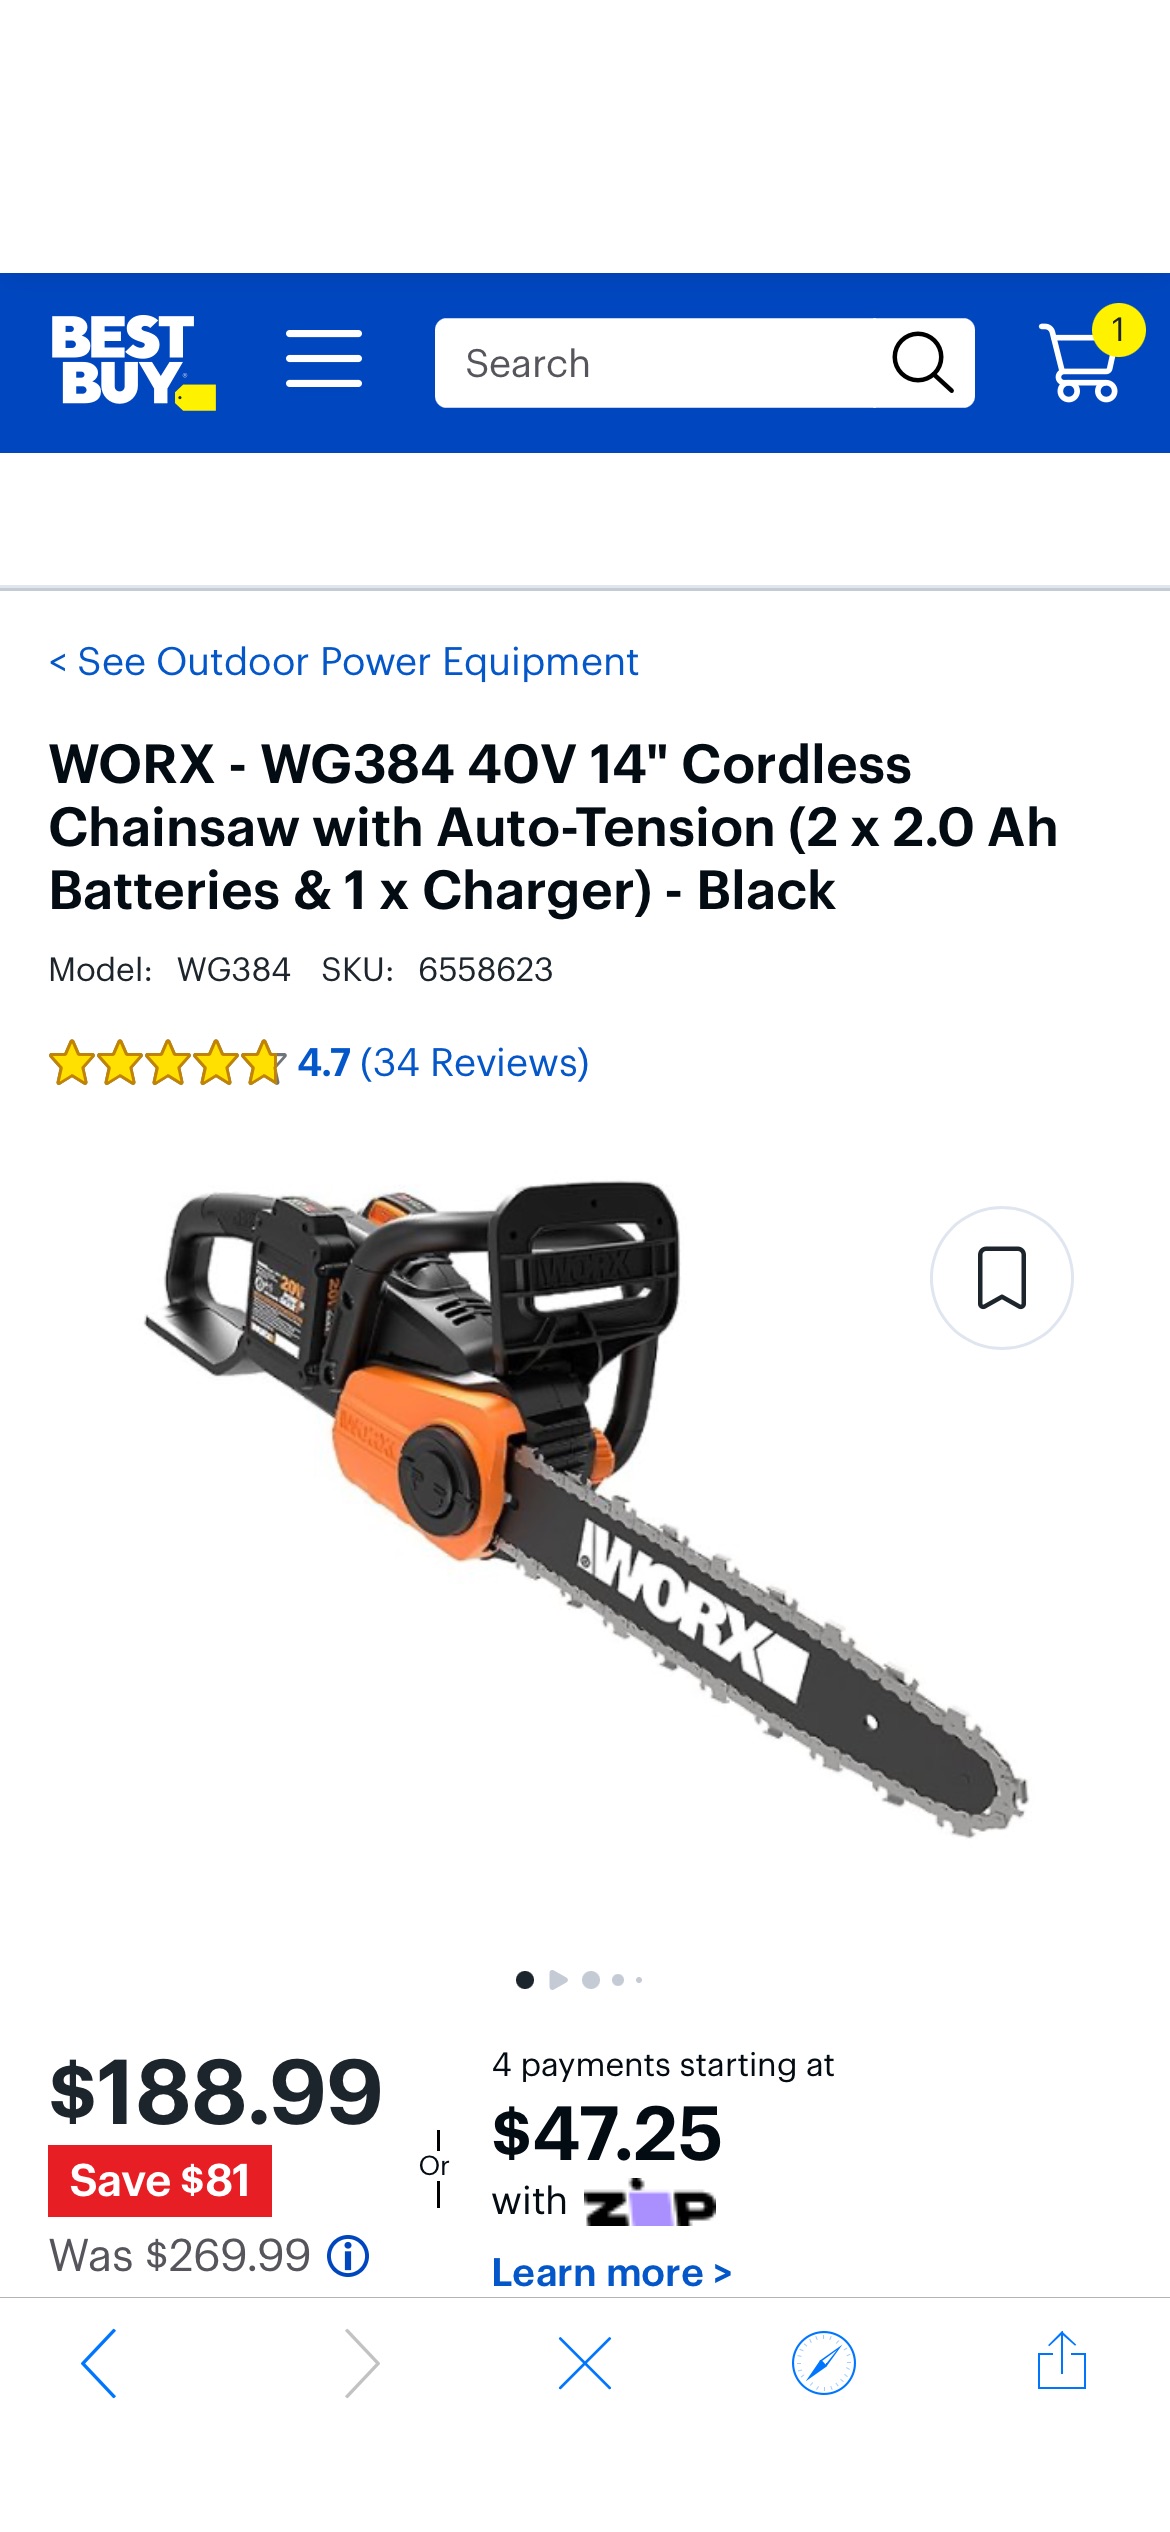 WORX WG384 40V 14" Cordless Chainsaw with Auto-Tension (2 x 2.0 Ah Batteries & 1 x Charger) Black WG384 - Best Buy